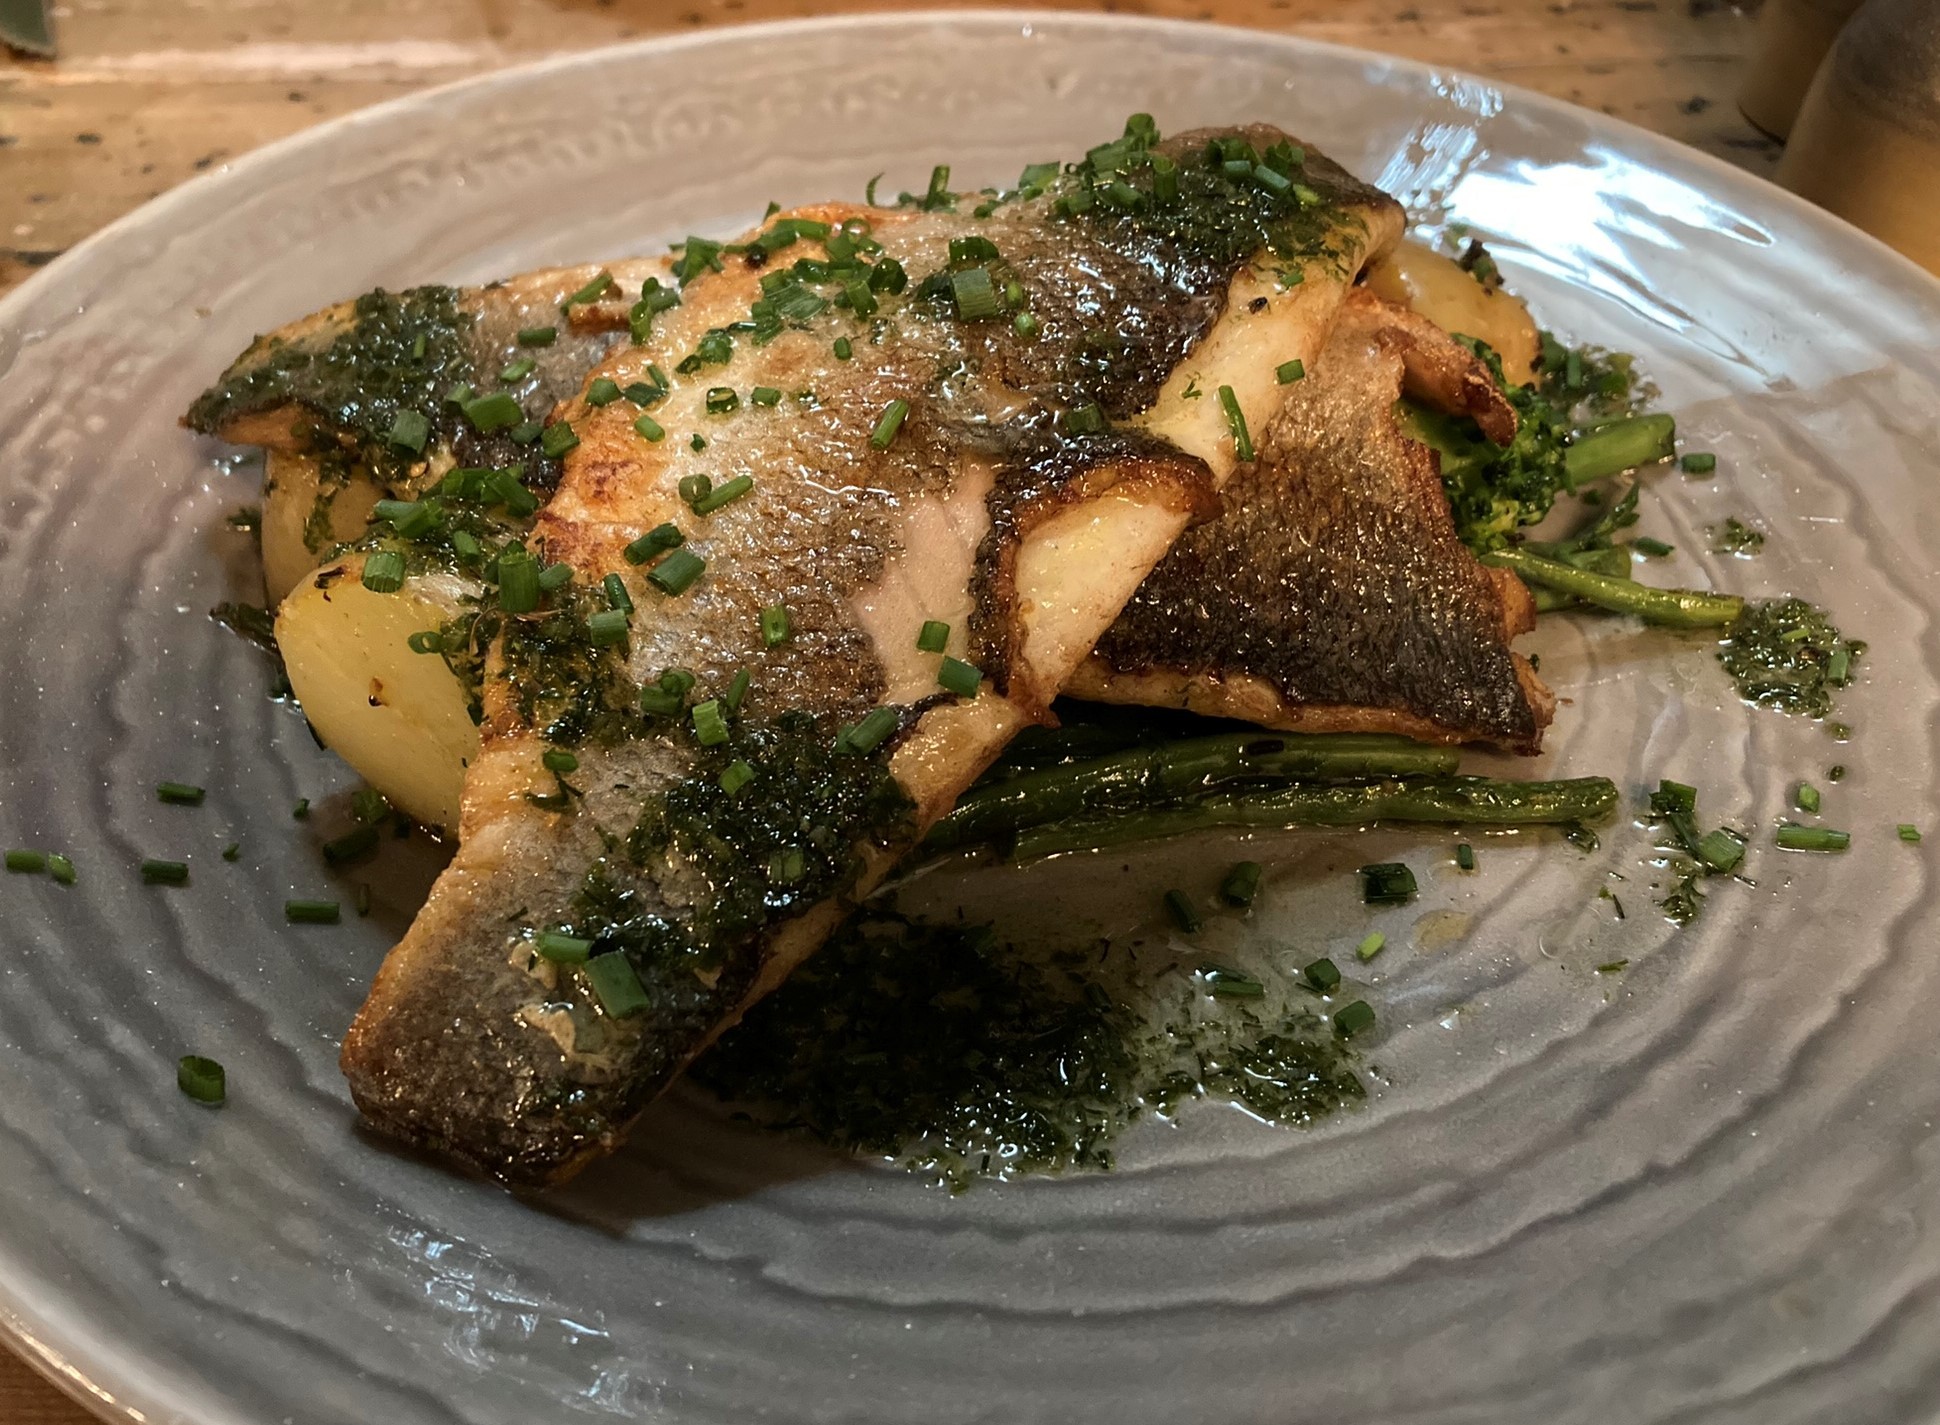 The pan-fried sea bass on a bed of greens